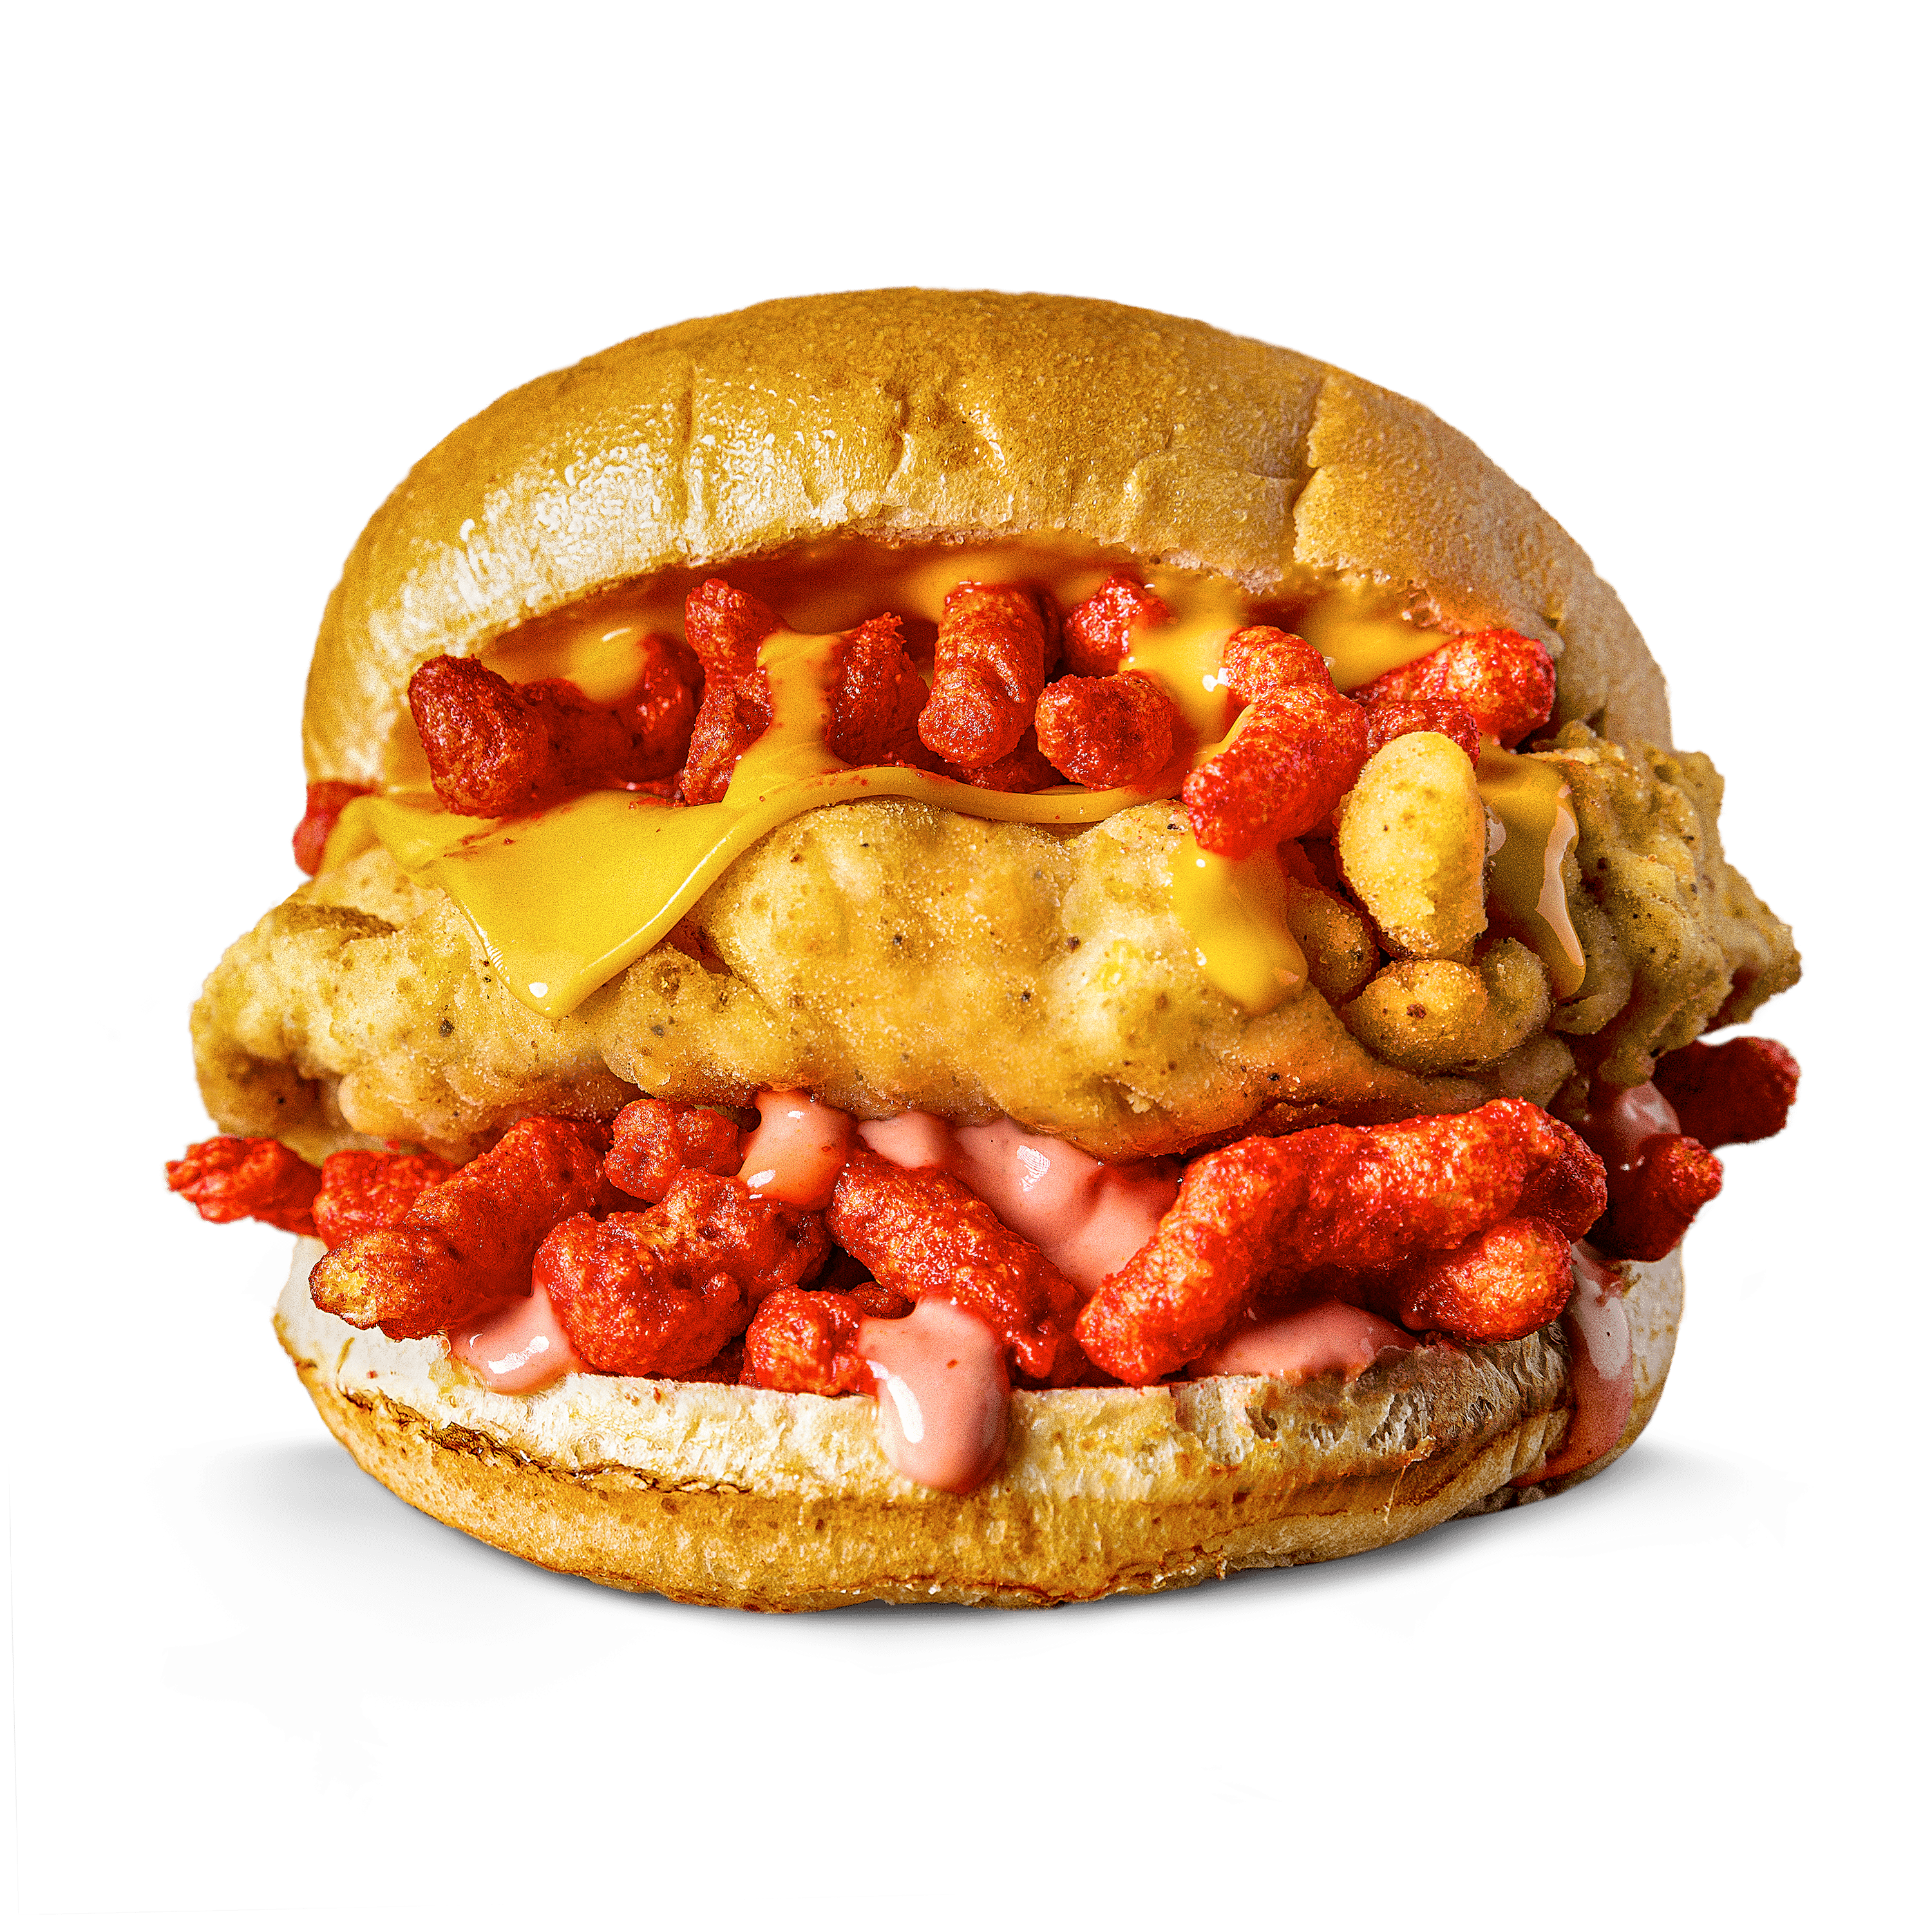 The Firecracker Burger - Spicy chicken burger topped with cheese, cheese sauce & 'Hot Cheetos'